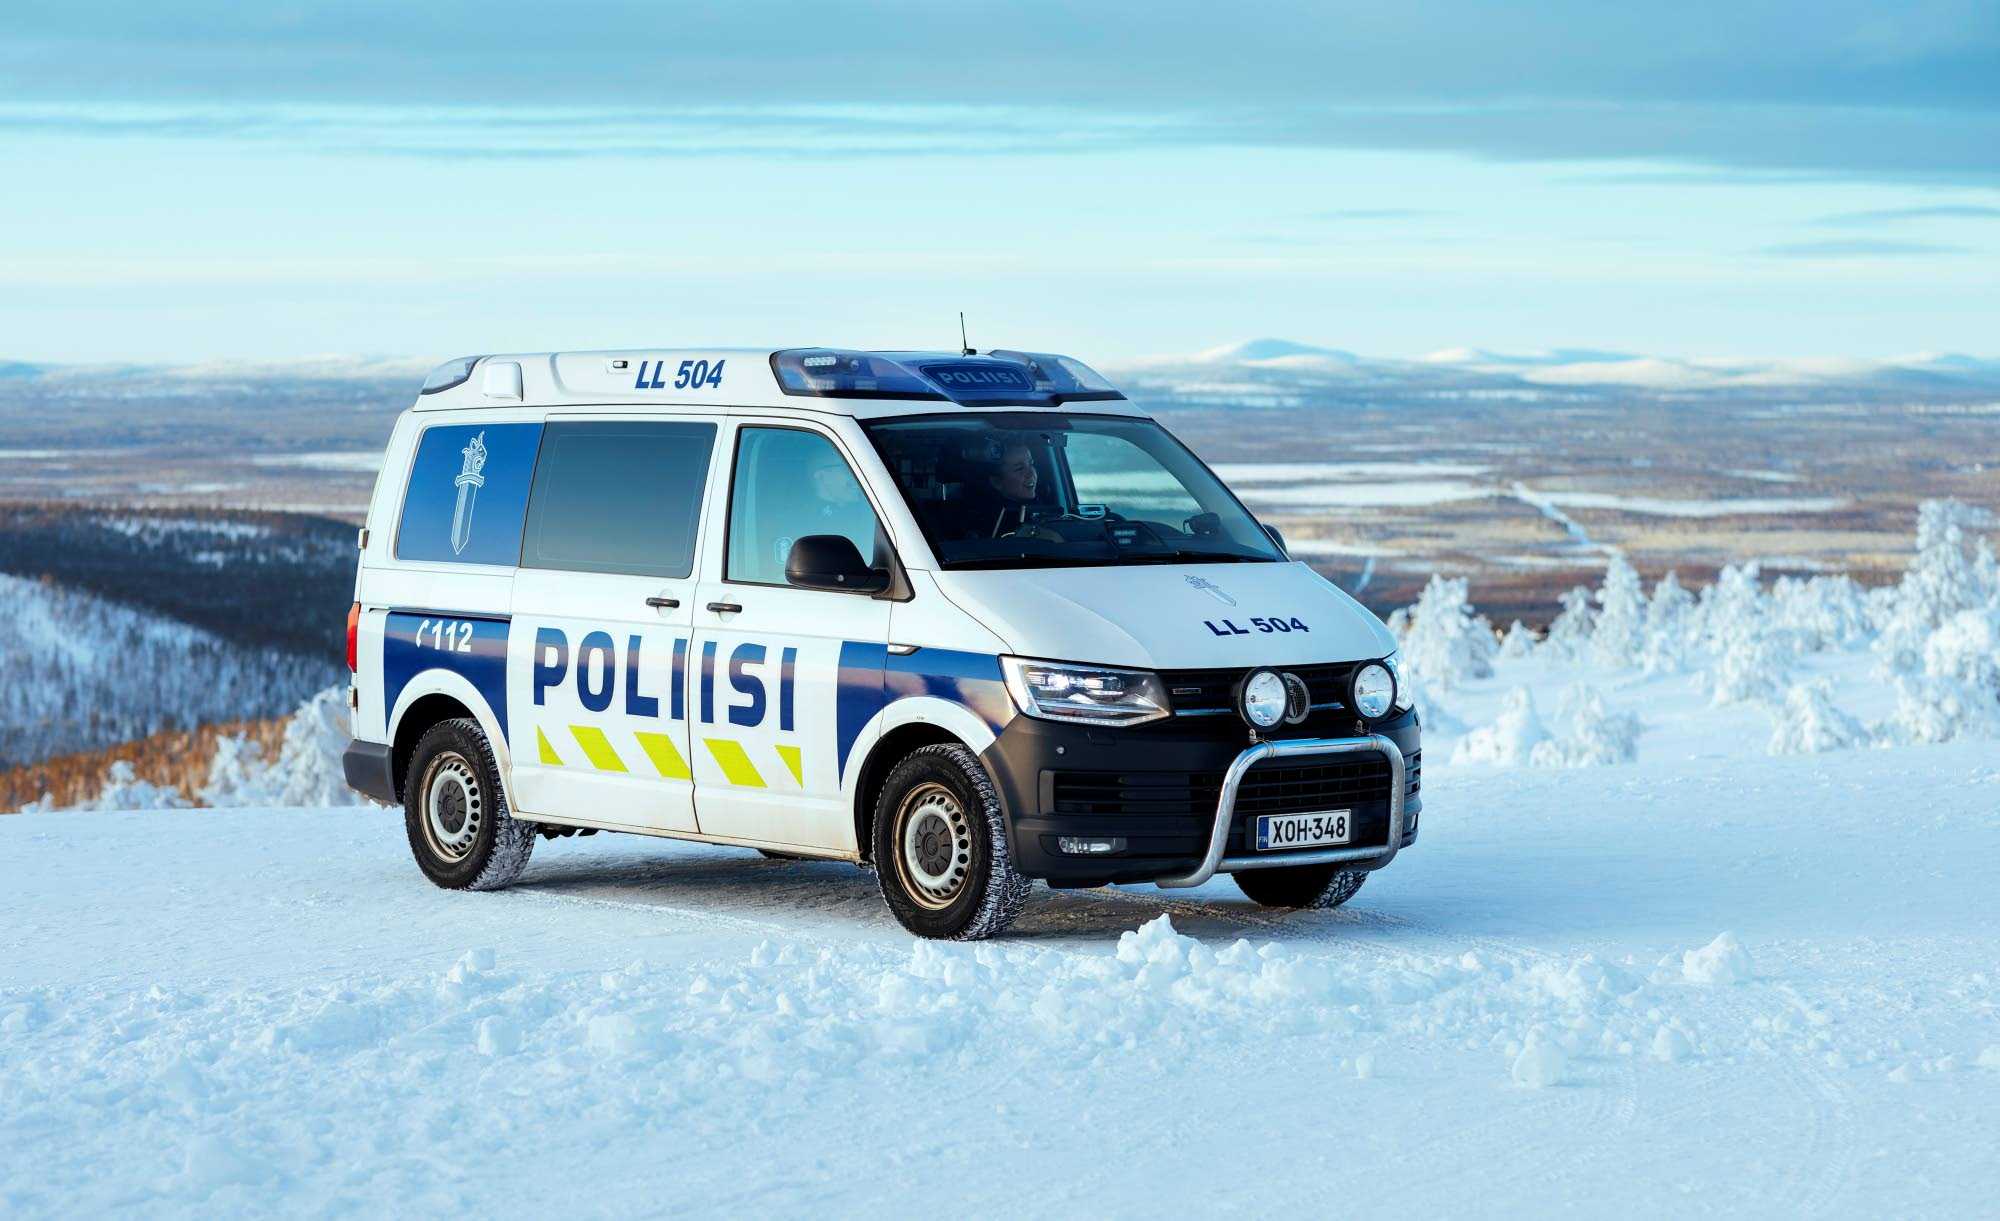 A police car in Lapland on top of a snowy mountain. More mountains can be seen in the background.